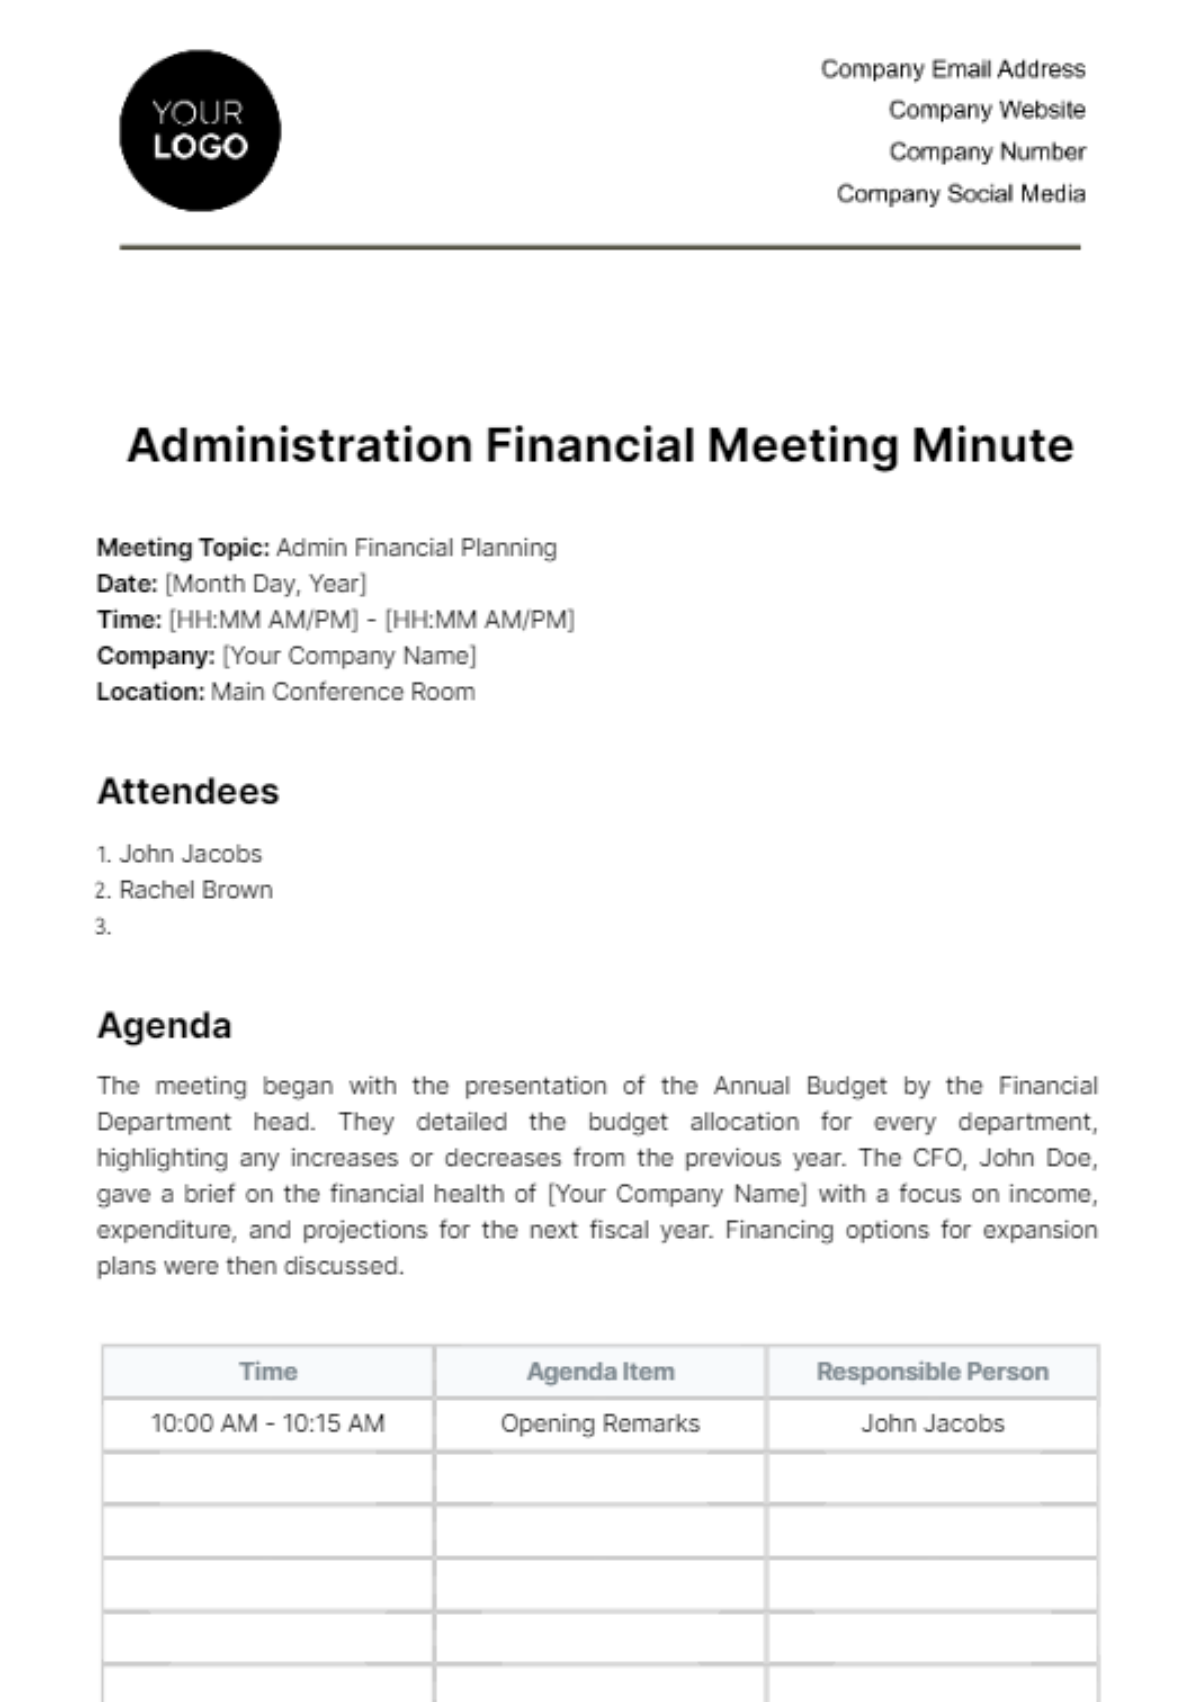 Free Administration Financial Meeting Minute Template